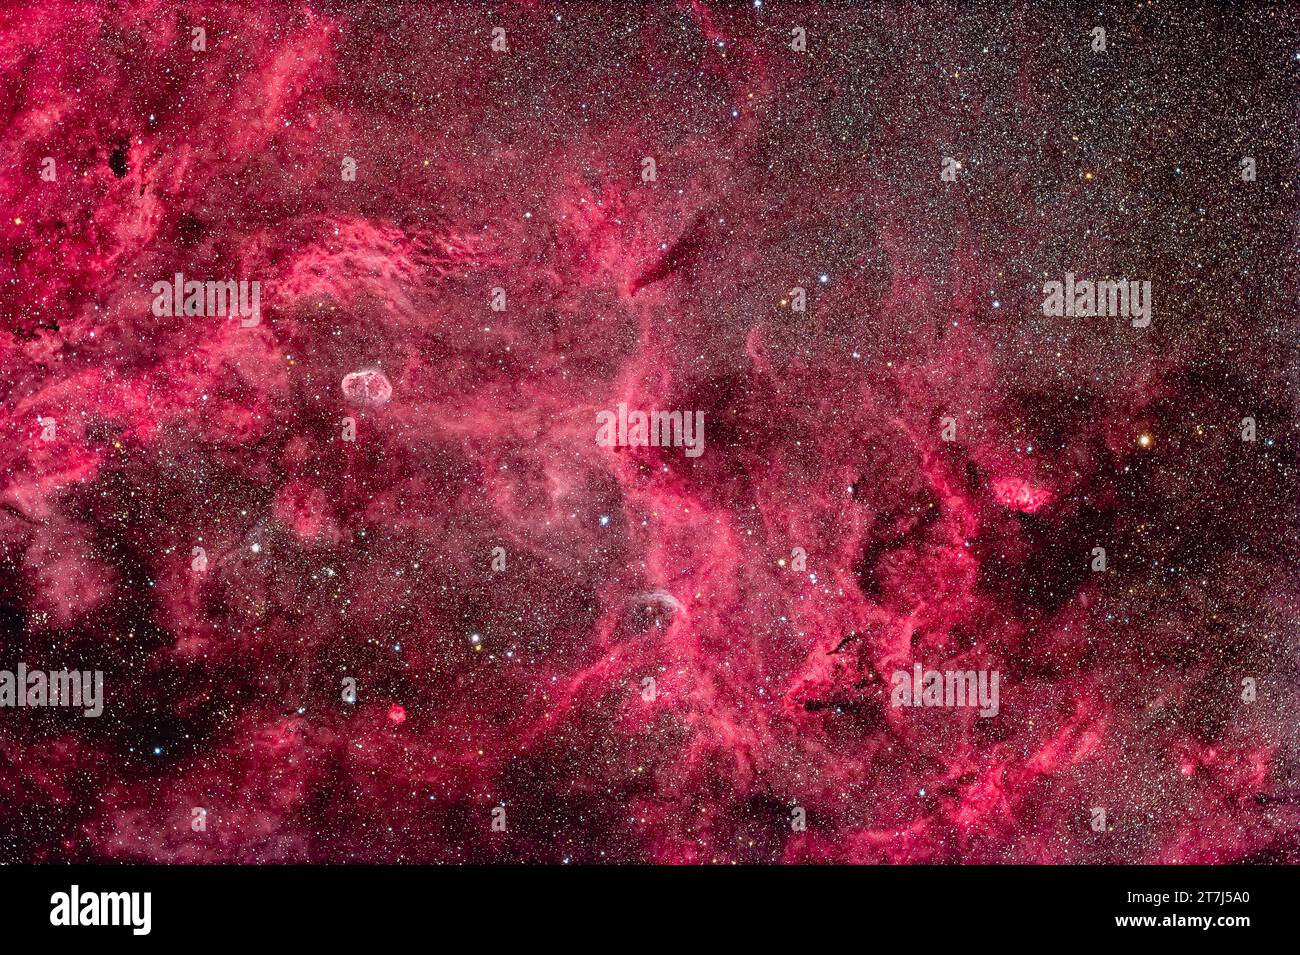 This is the rich area of nebulosity in central Cygnus that includes the Crescent Nebula (aka NGC 6888) at left, and the Tulip Nebula (aka Sharpless 2- Stock Photo